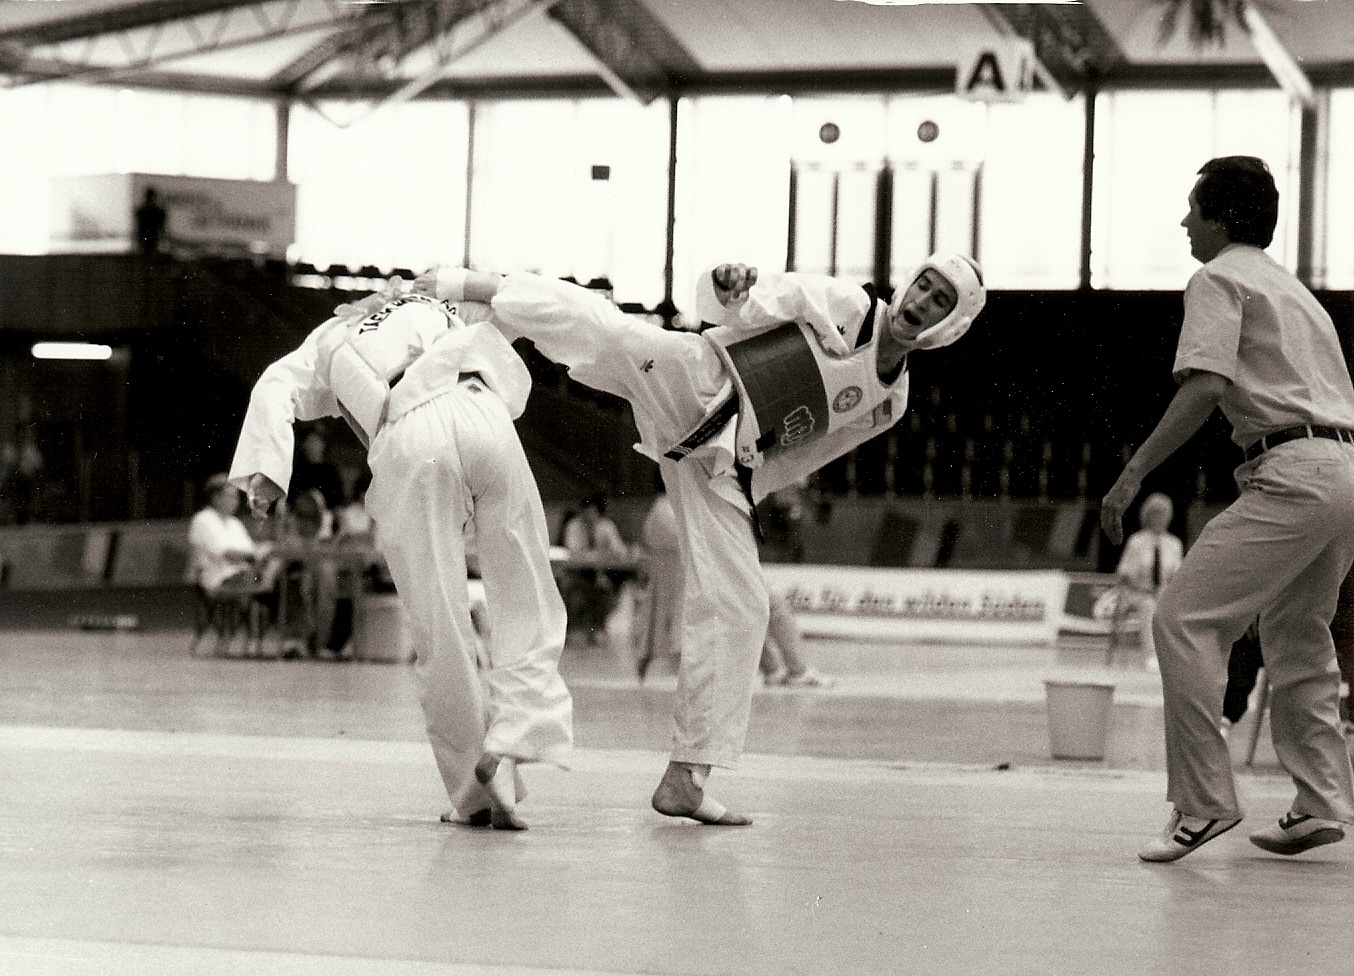 Grand Master Cooley competing at the 3rd World Games Karlsruhe, Germany – July 1989